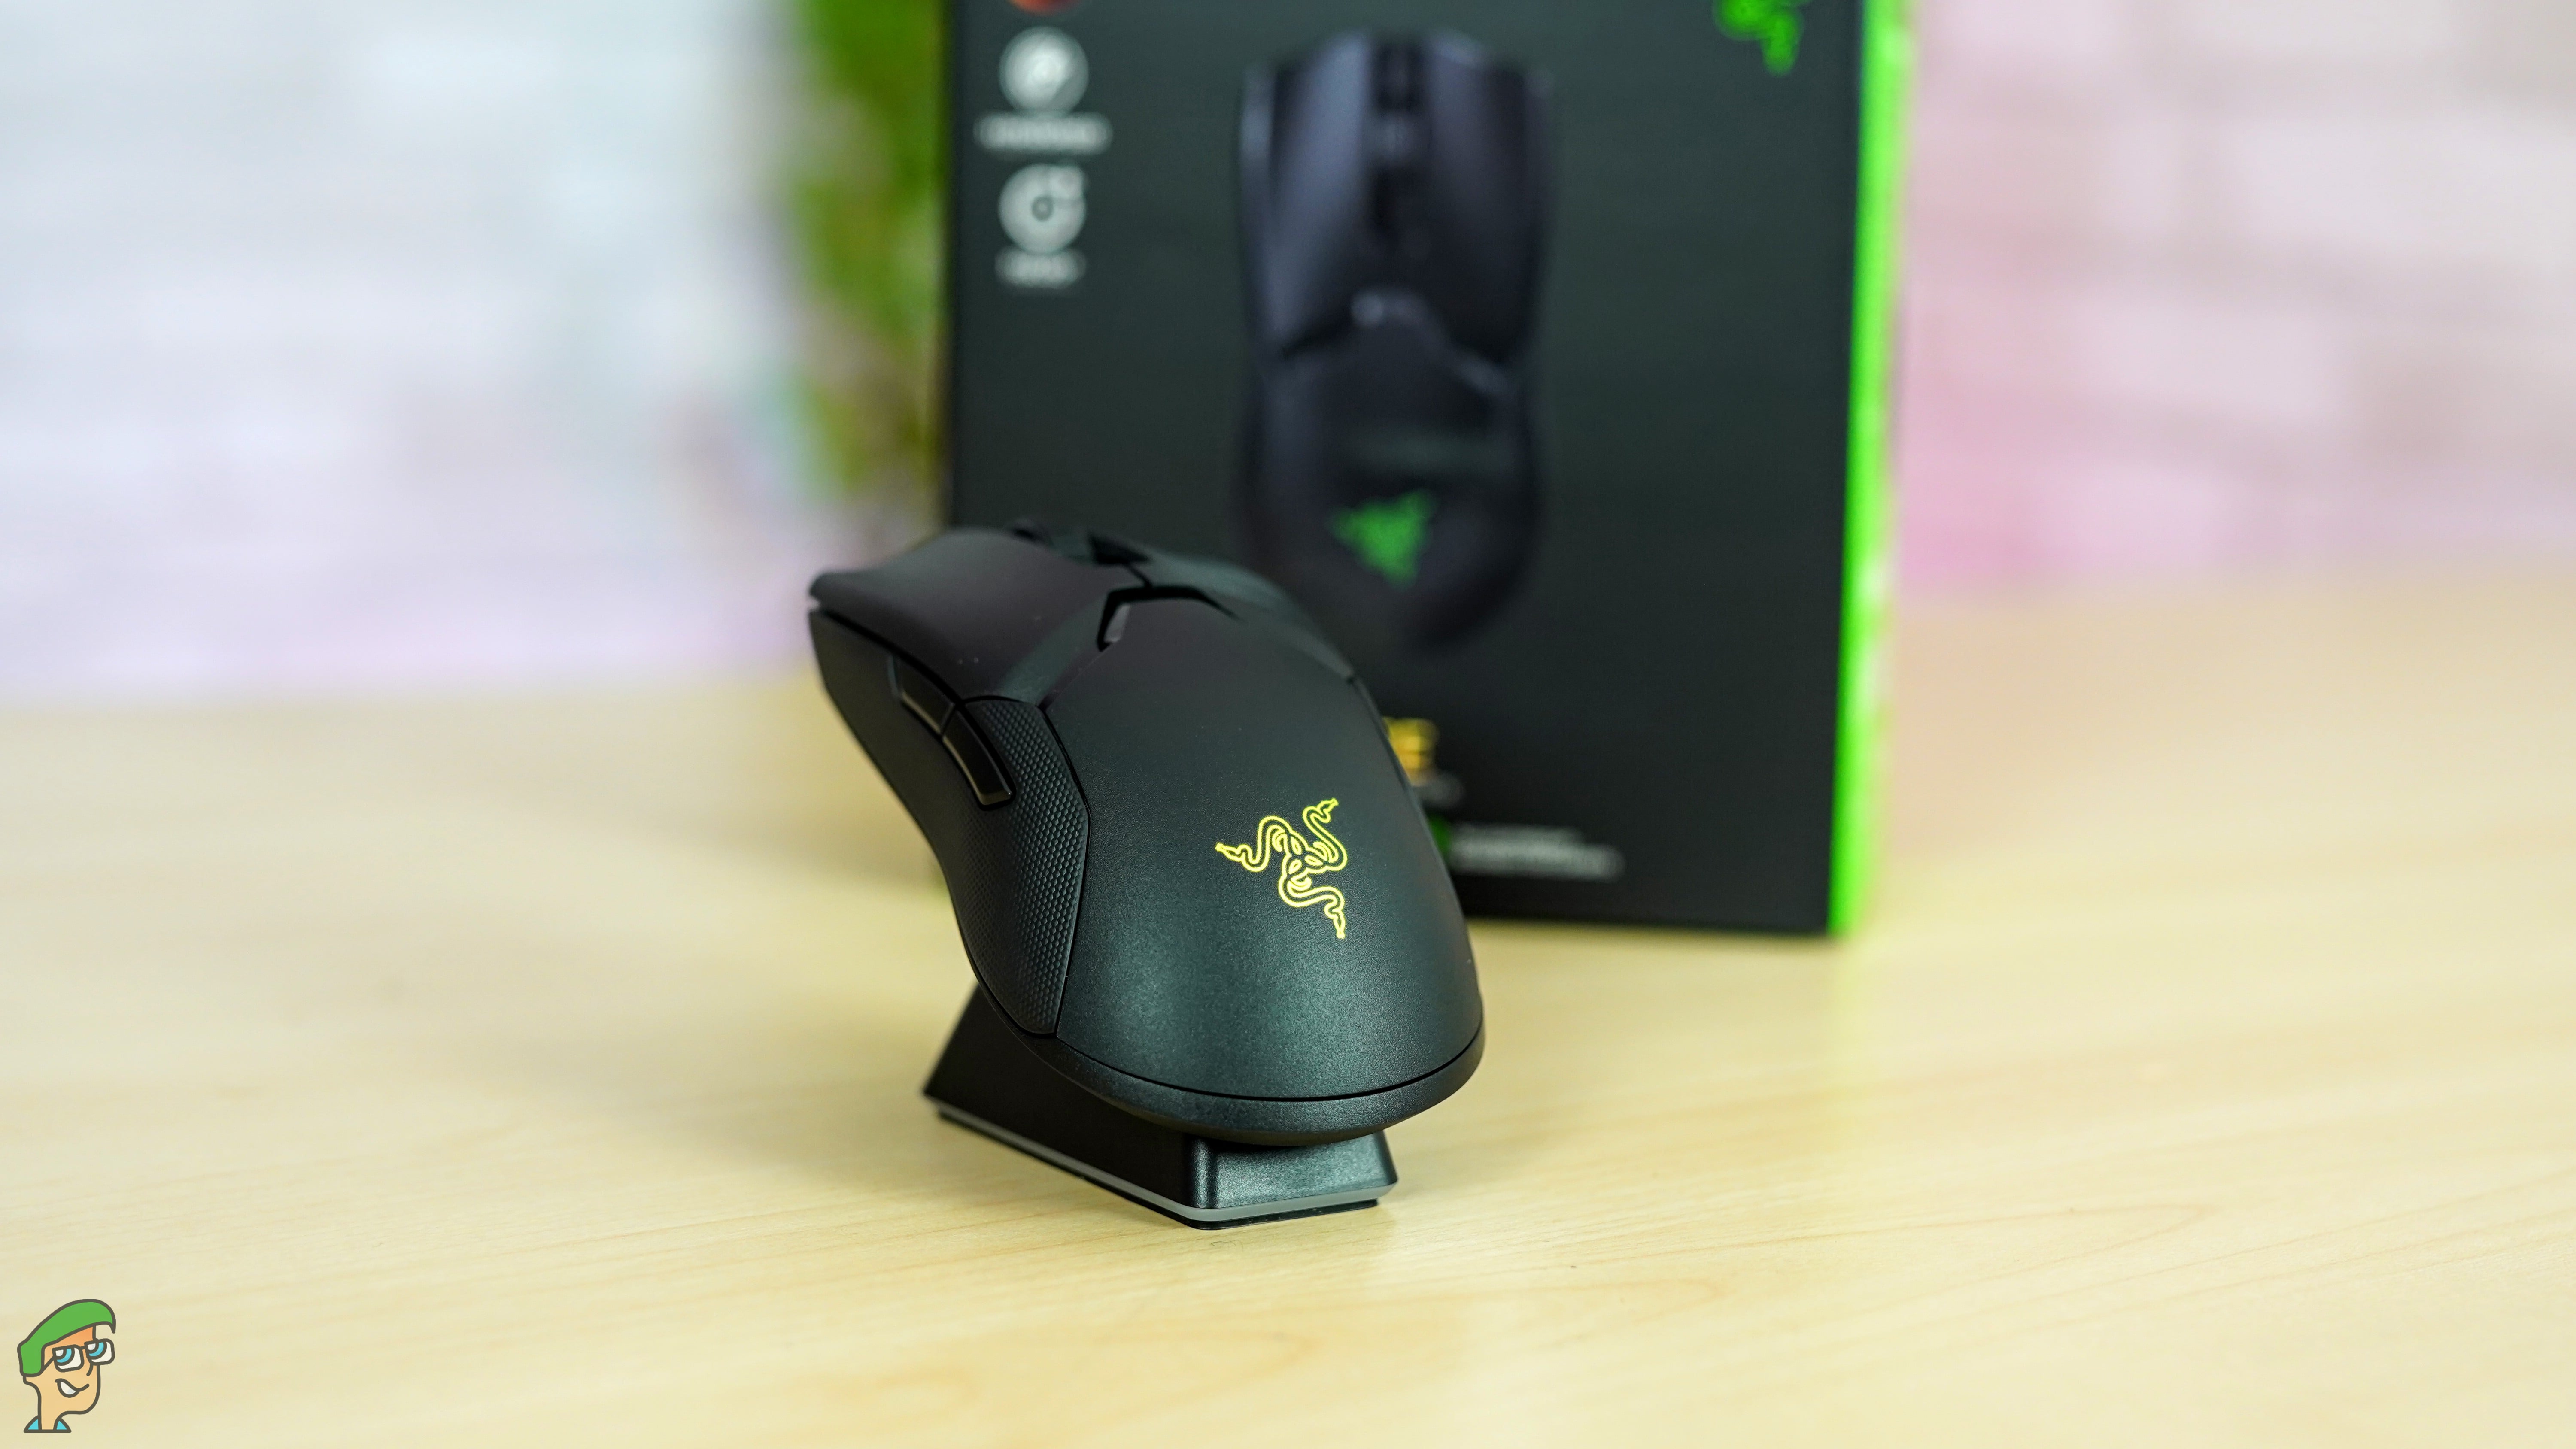 Razer Viper Ultimate Wireless Gaming Mouse Review Appuals Com